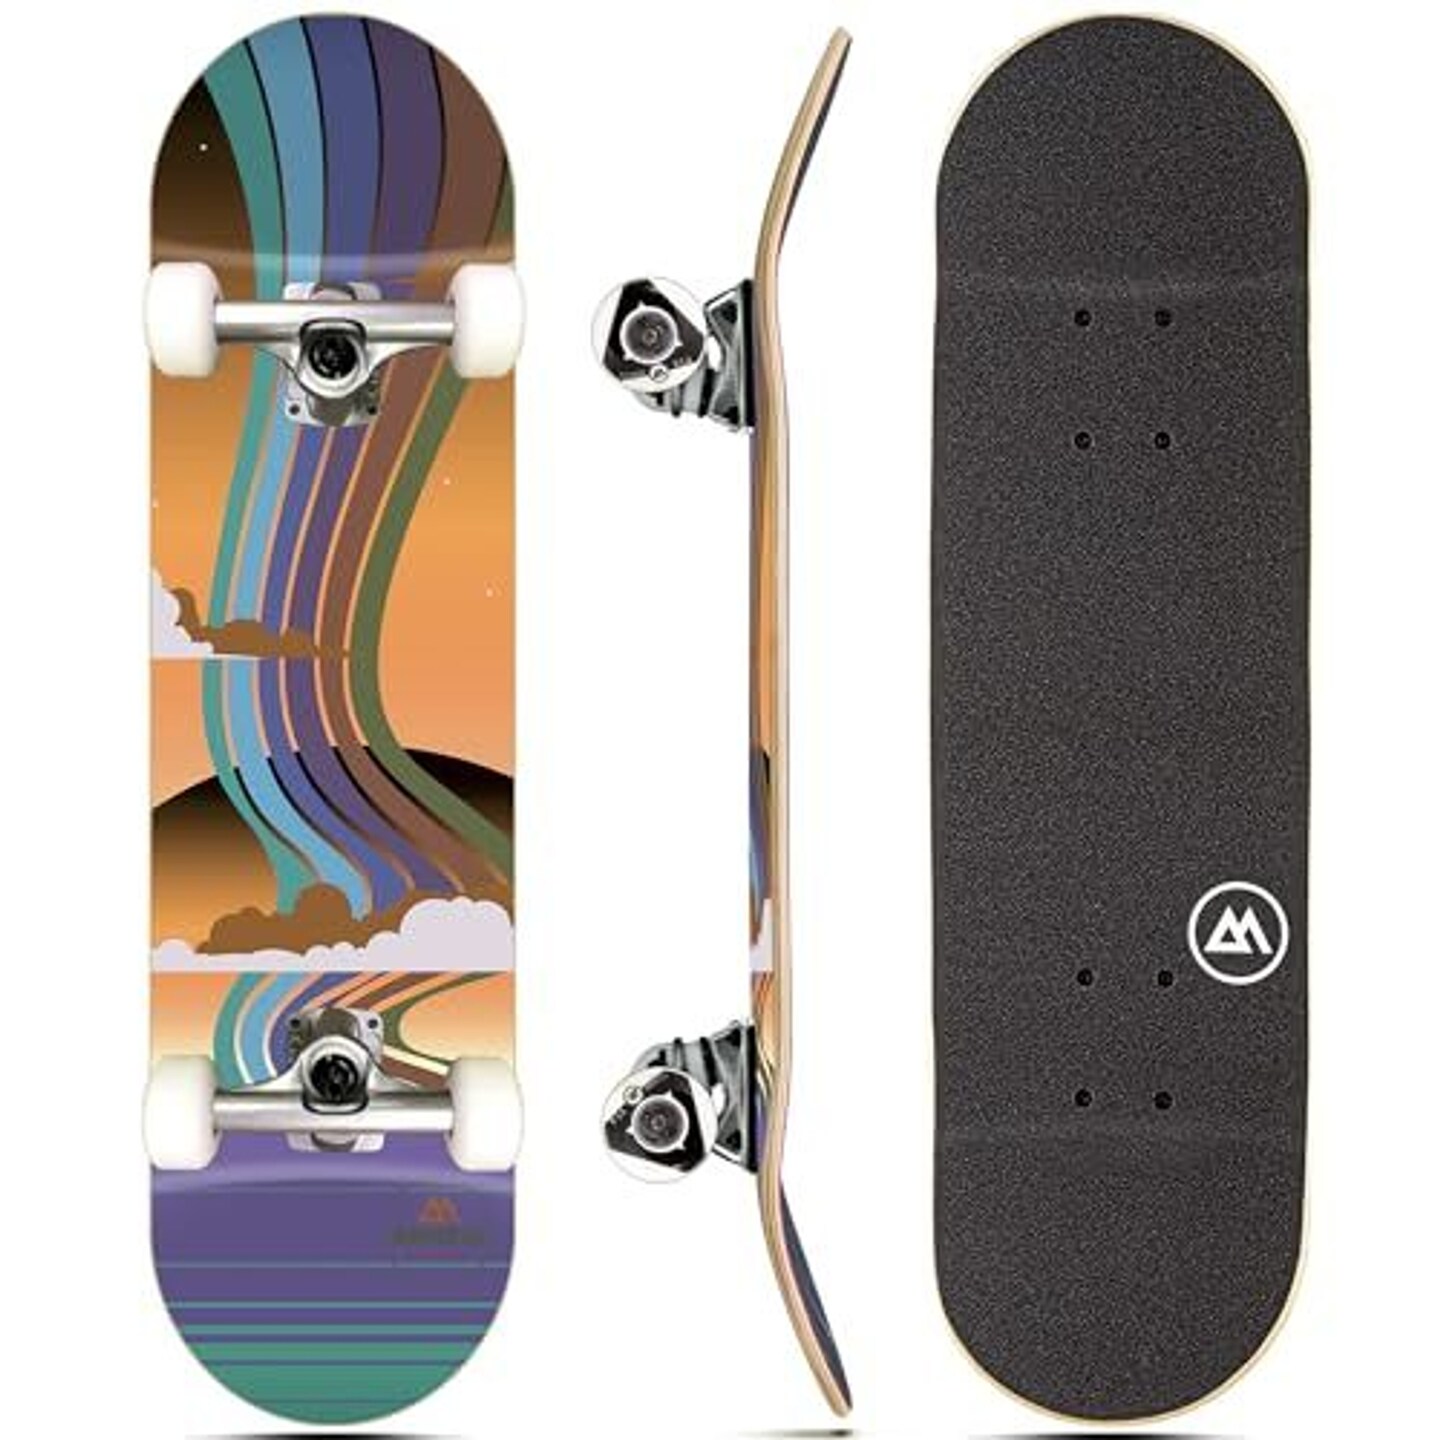 Magneto Complete Skateboard | Maple Wood | ABEC 5 Bearings | Double Kick Concave Deck | Kids Skateboard Cruiser Skateboard | Skateboards for Beginners, Teens &#x26; Adults (Free Stickers Included)